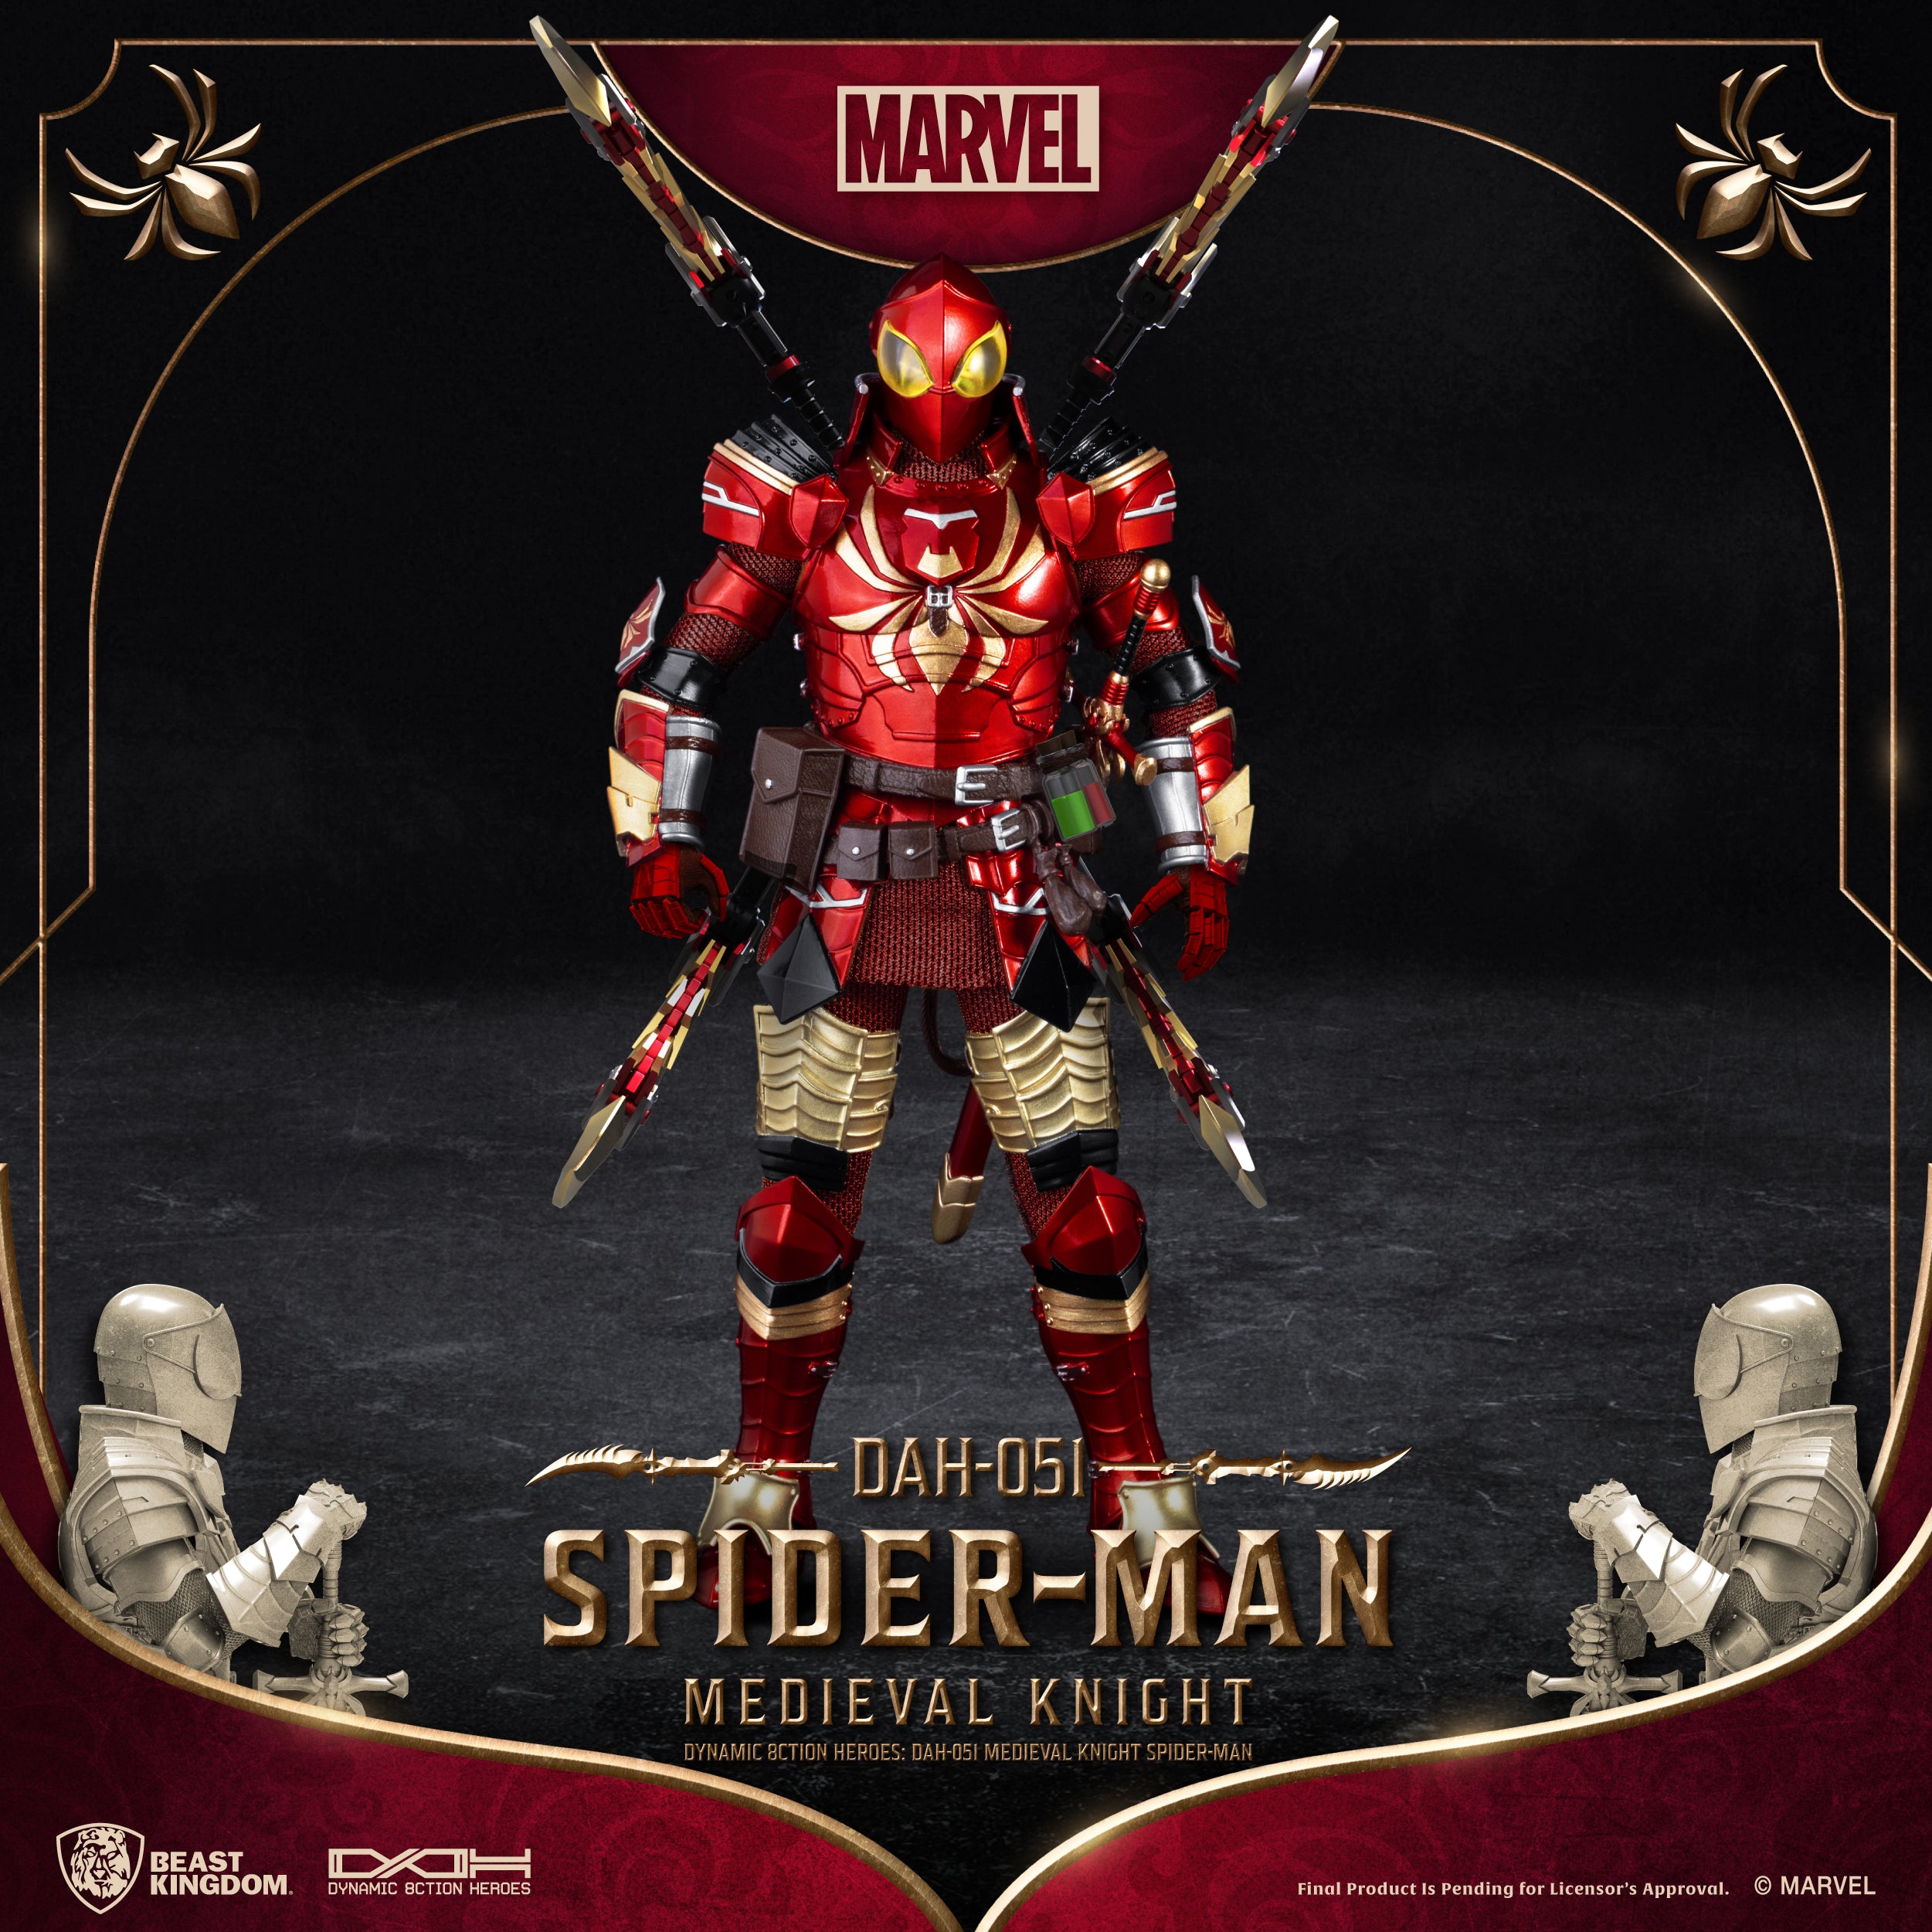 Beast Kingdom DAH-051 Medieval Knight Spider-Man 1:9 Scale Dynamic 8ction Heroes Action Figure